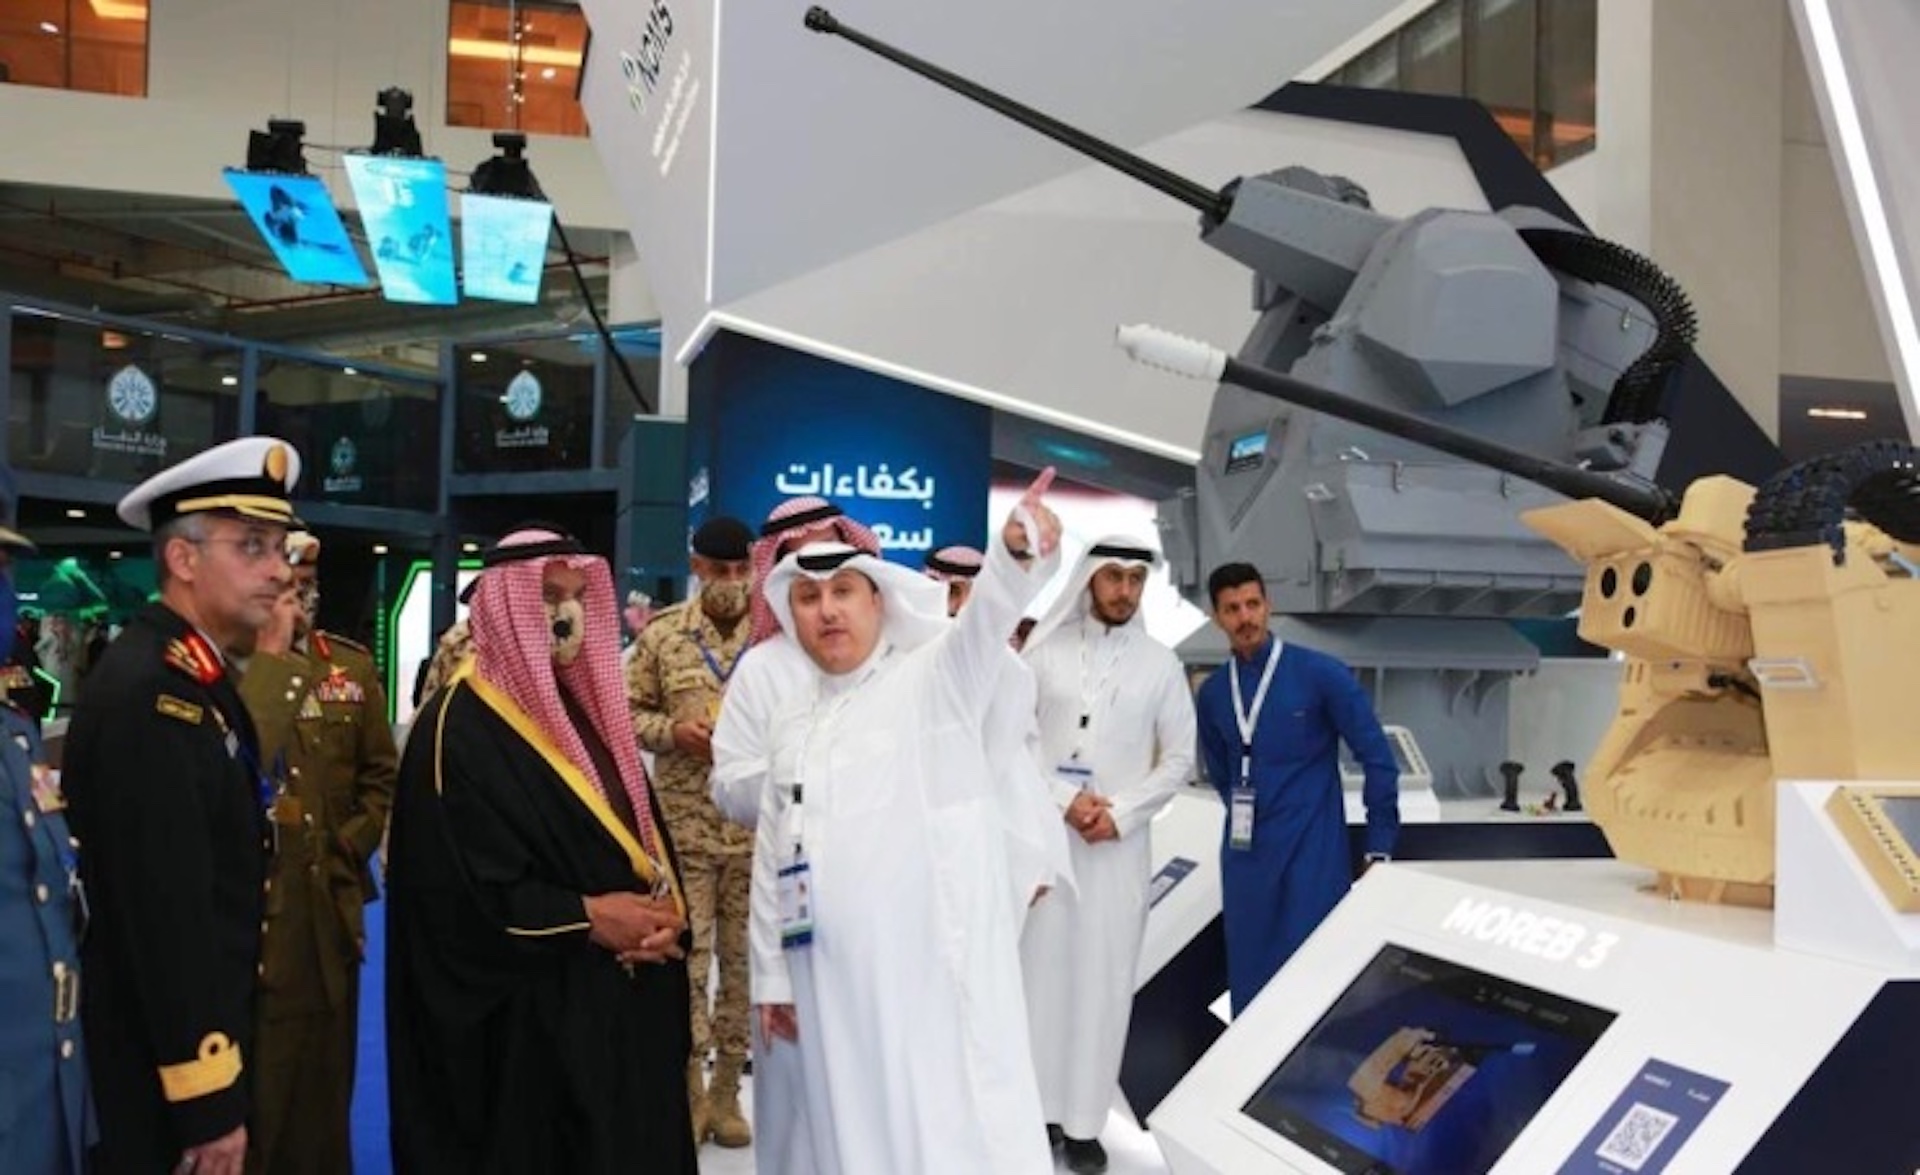 World Defence Show 2022 opening ceremony in Riyadh attended by BDF Chief